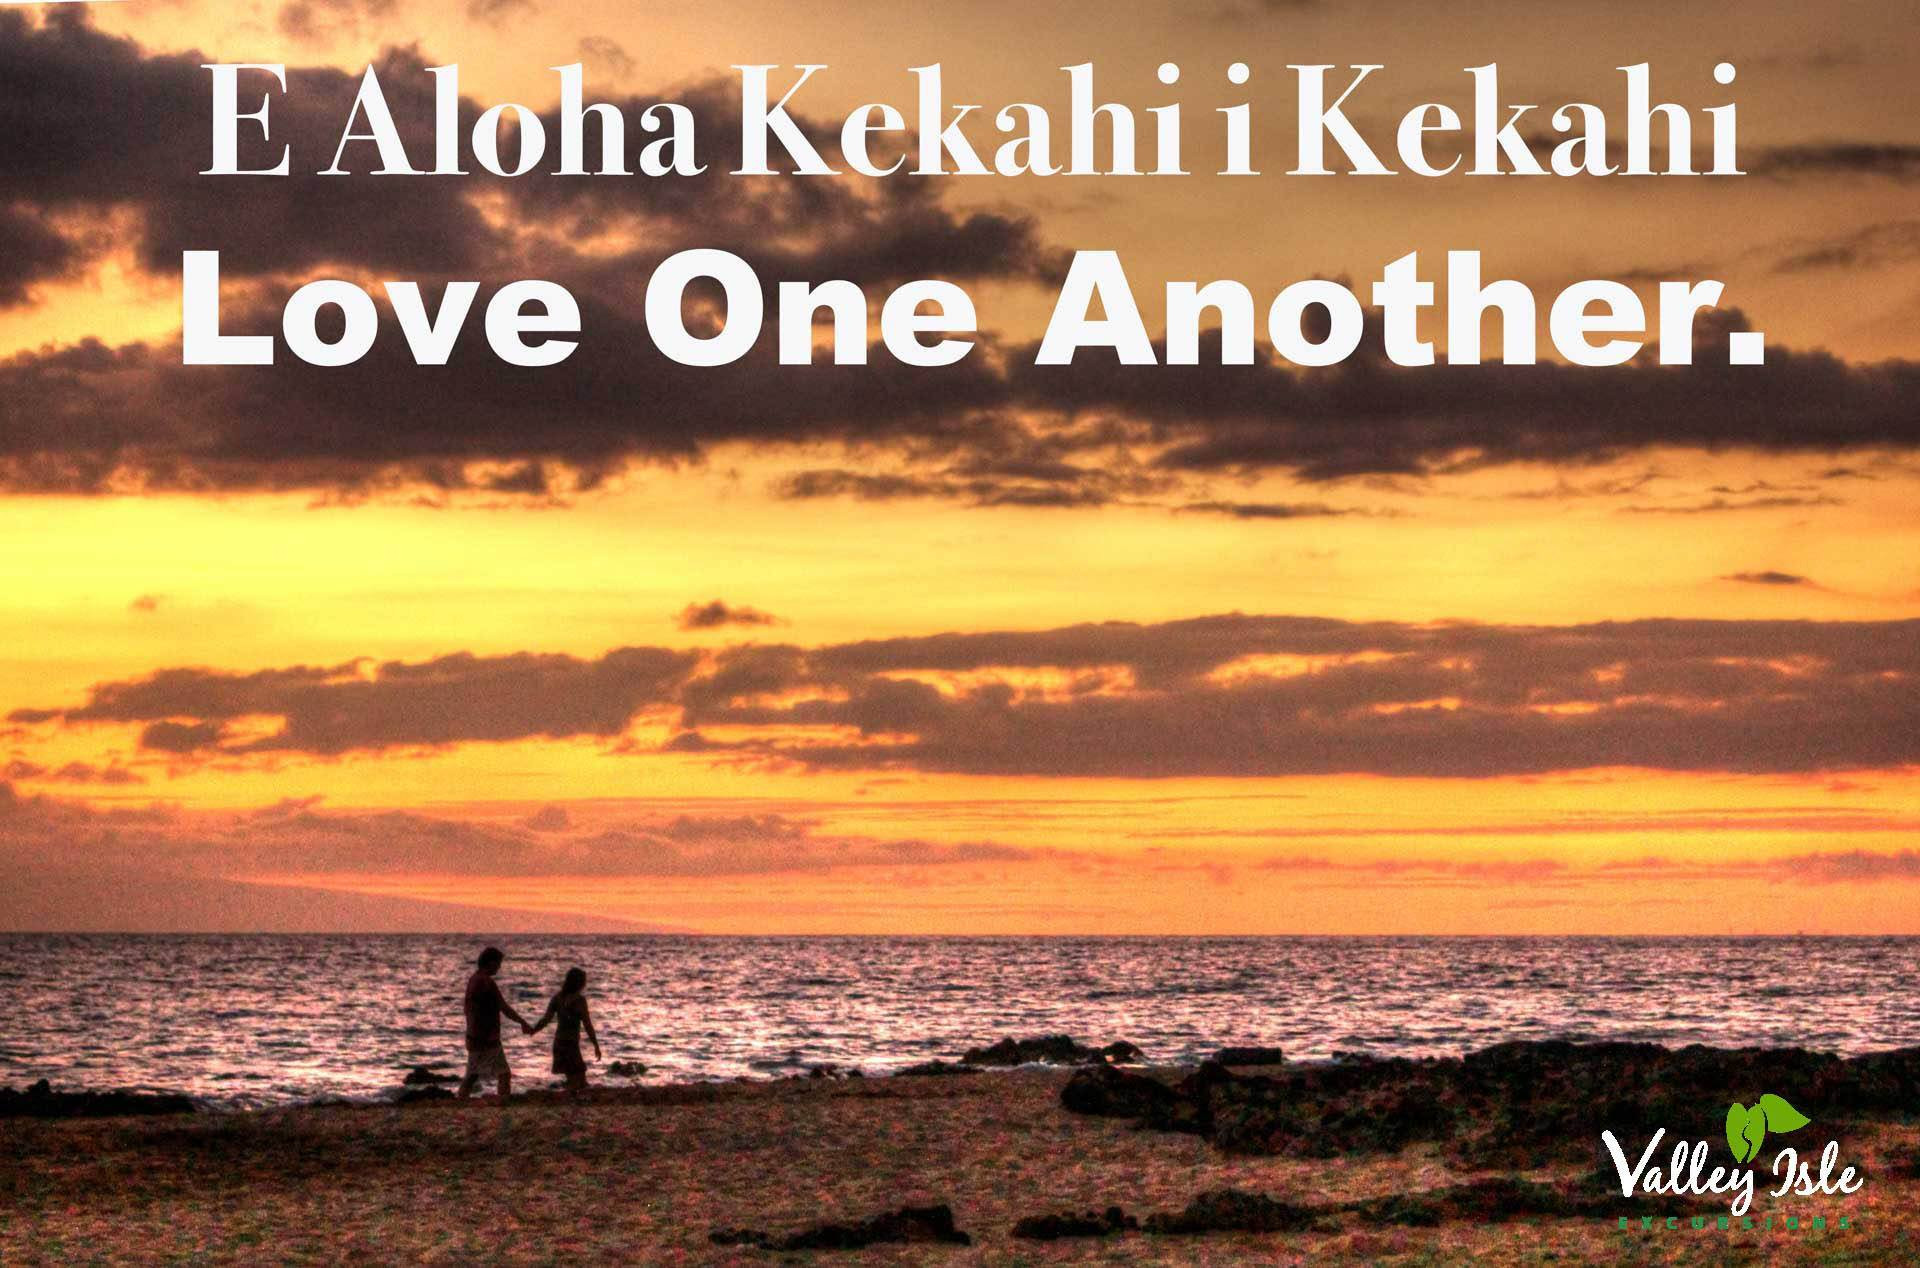 Hawaiian Quotes About Life
 Quotes and Proverbs Hawaii